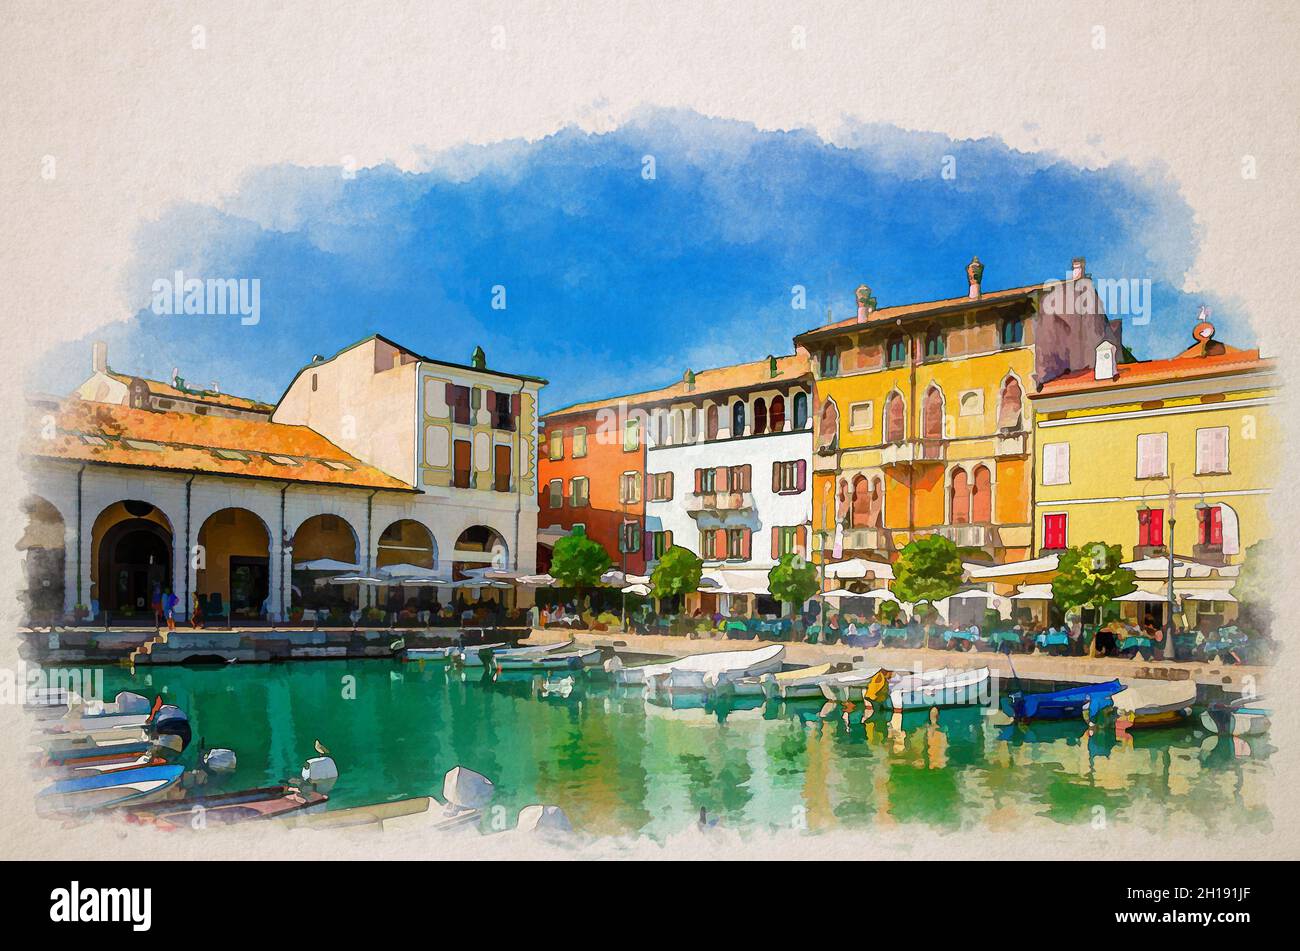 Watercolor drawing of Desenzano del Garda Old harbour Porto Vecchio with boats on turquoise water, green trees, street restaurants and traditional bui Stock Photo